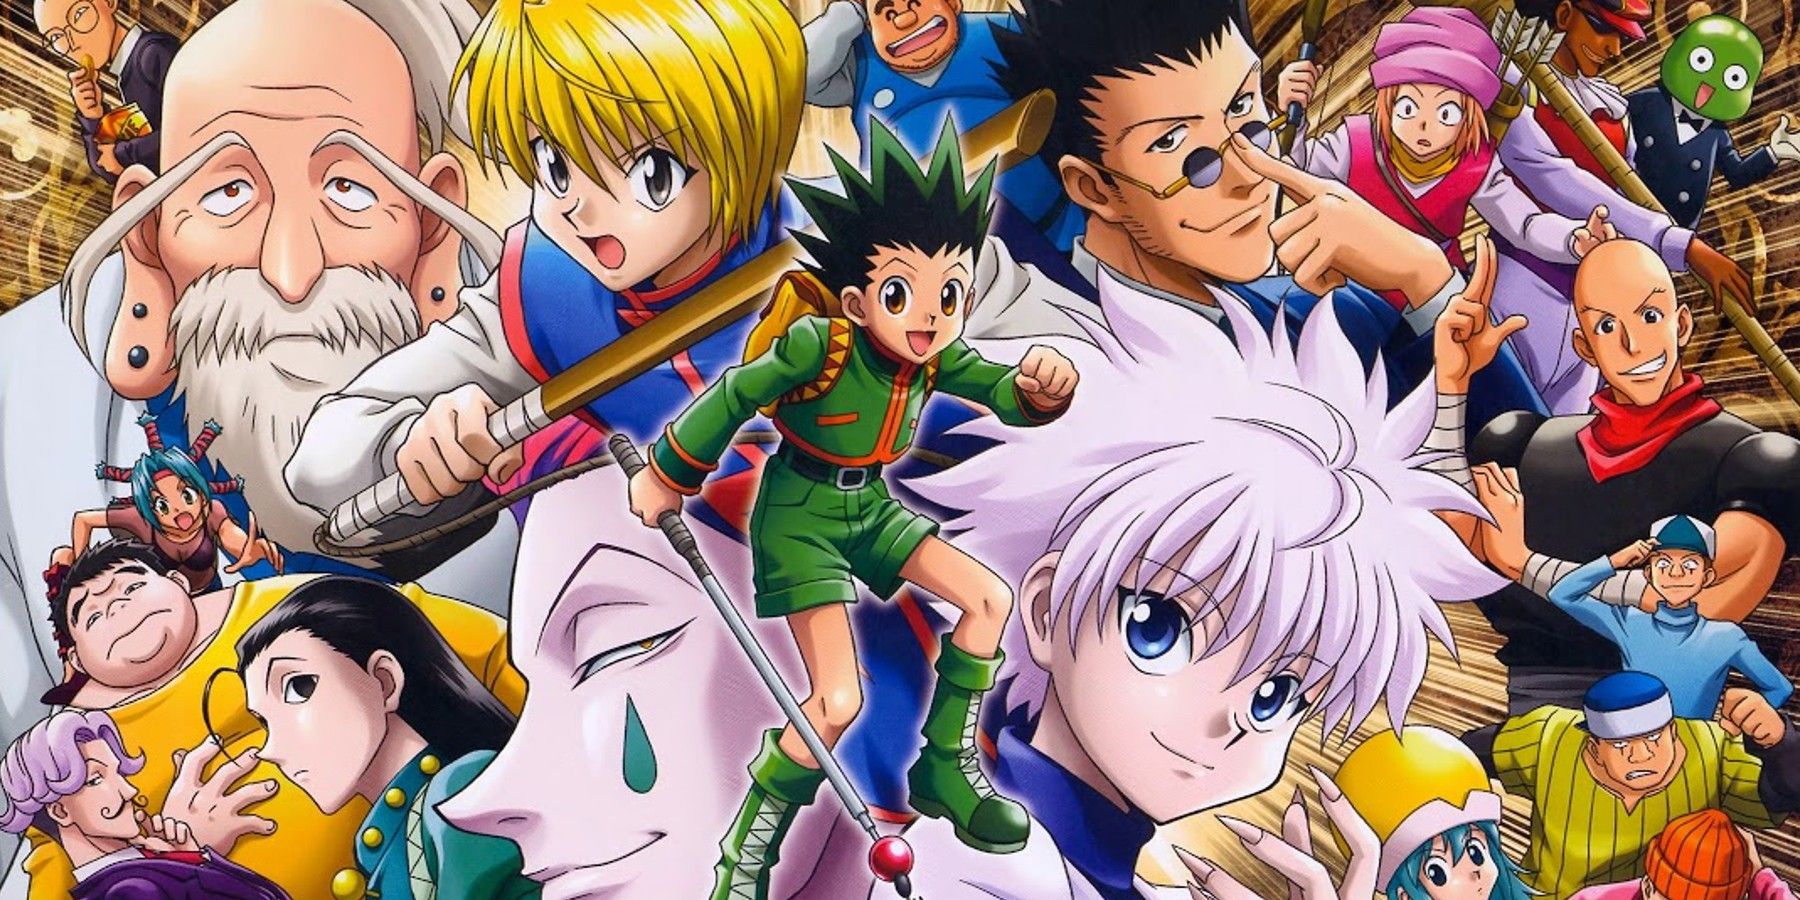 TOP 10 STRONGEST HUNTER X HUNTER CHARACTERS! WHO IS THE STRONGEST